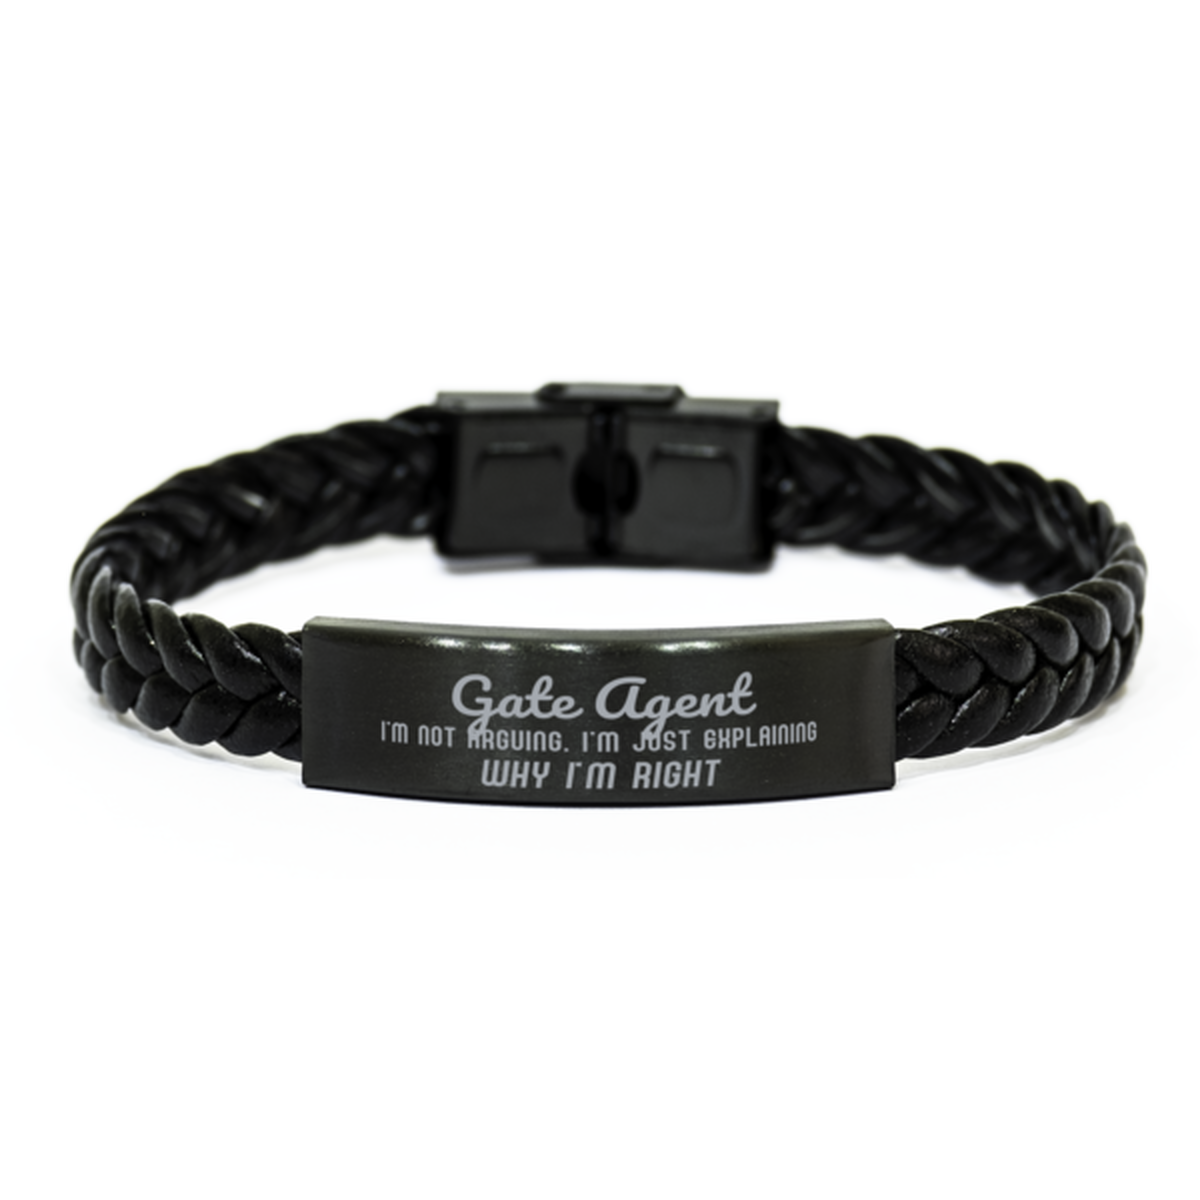 Gate Agent I'm not Arguing. I'm Just Explaining Why I'm RIGHT Braided Leather Bracelet, Graduation Birthday Christmas Gate Agent Gifts For Gate Agent Funny Saying Quote Present for Men Women Coworker